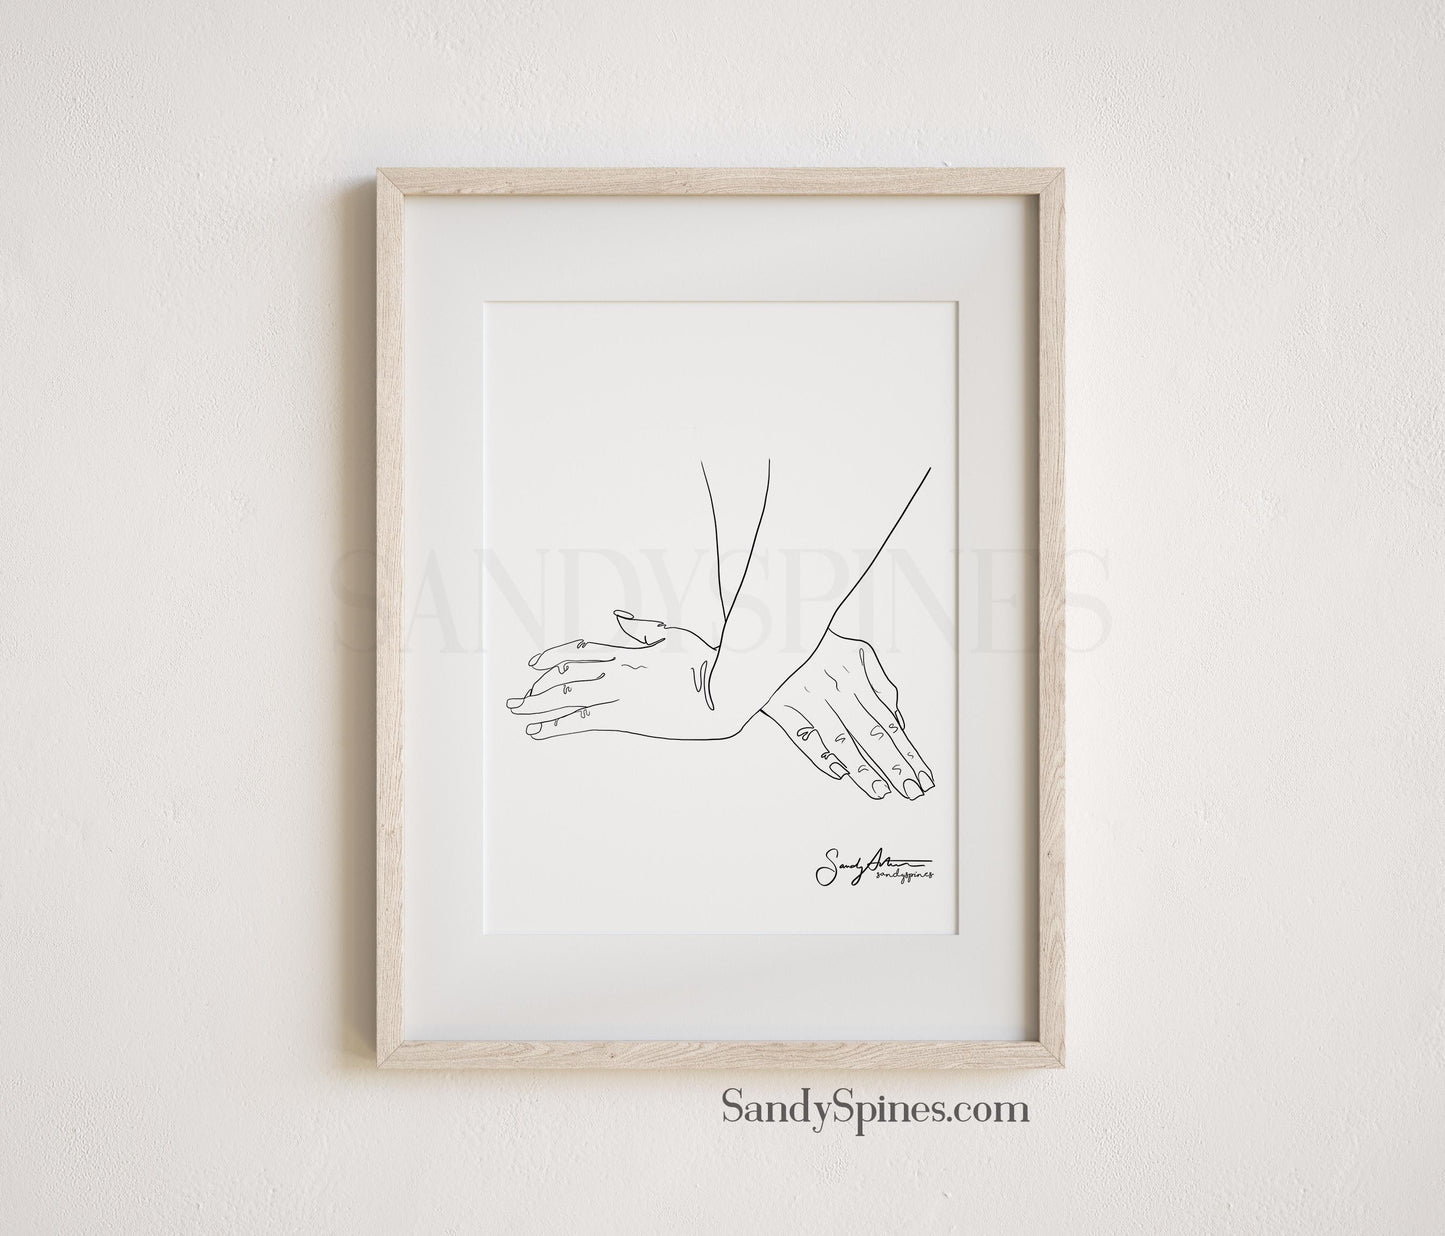 Original Sketch Artwork by Dr. Sandy Arthur; The image depicts 2 hands crossed and applying pressure during a therapy session